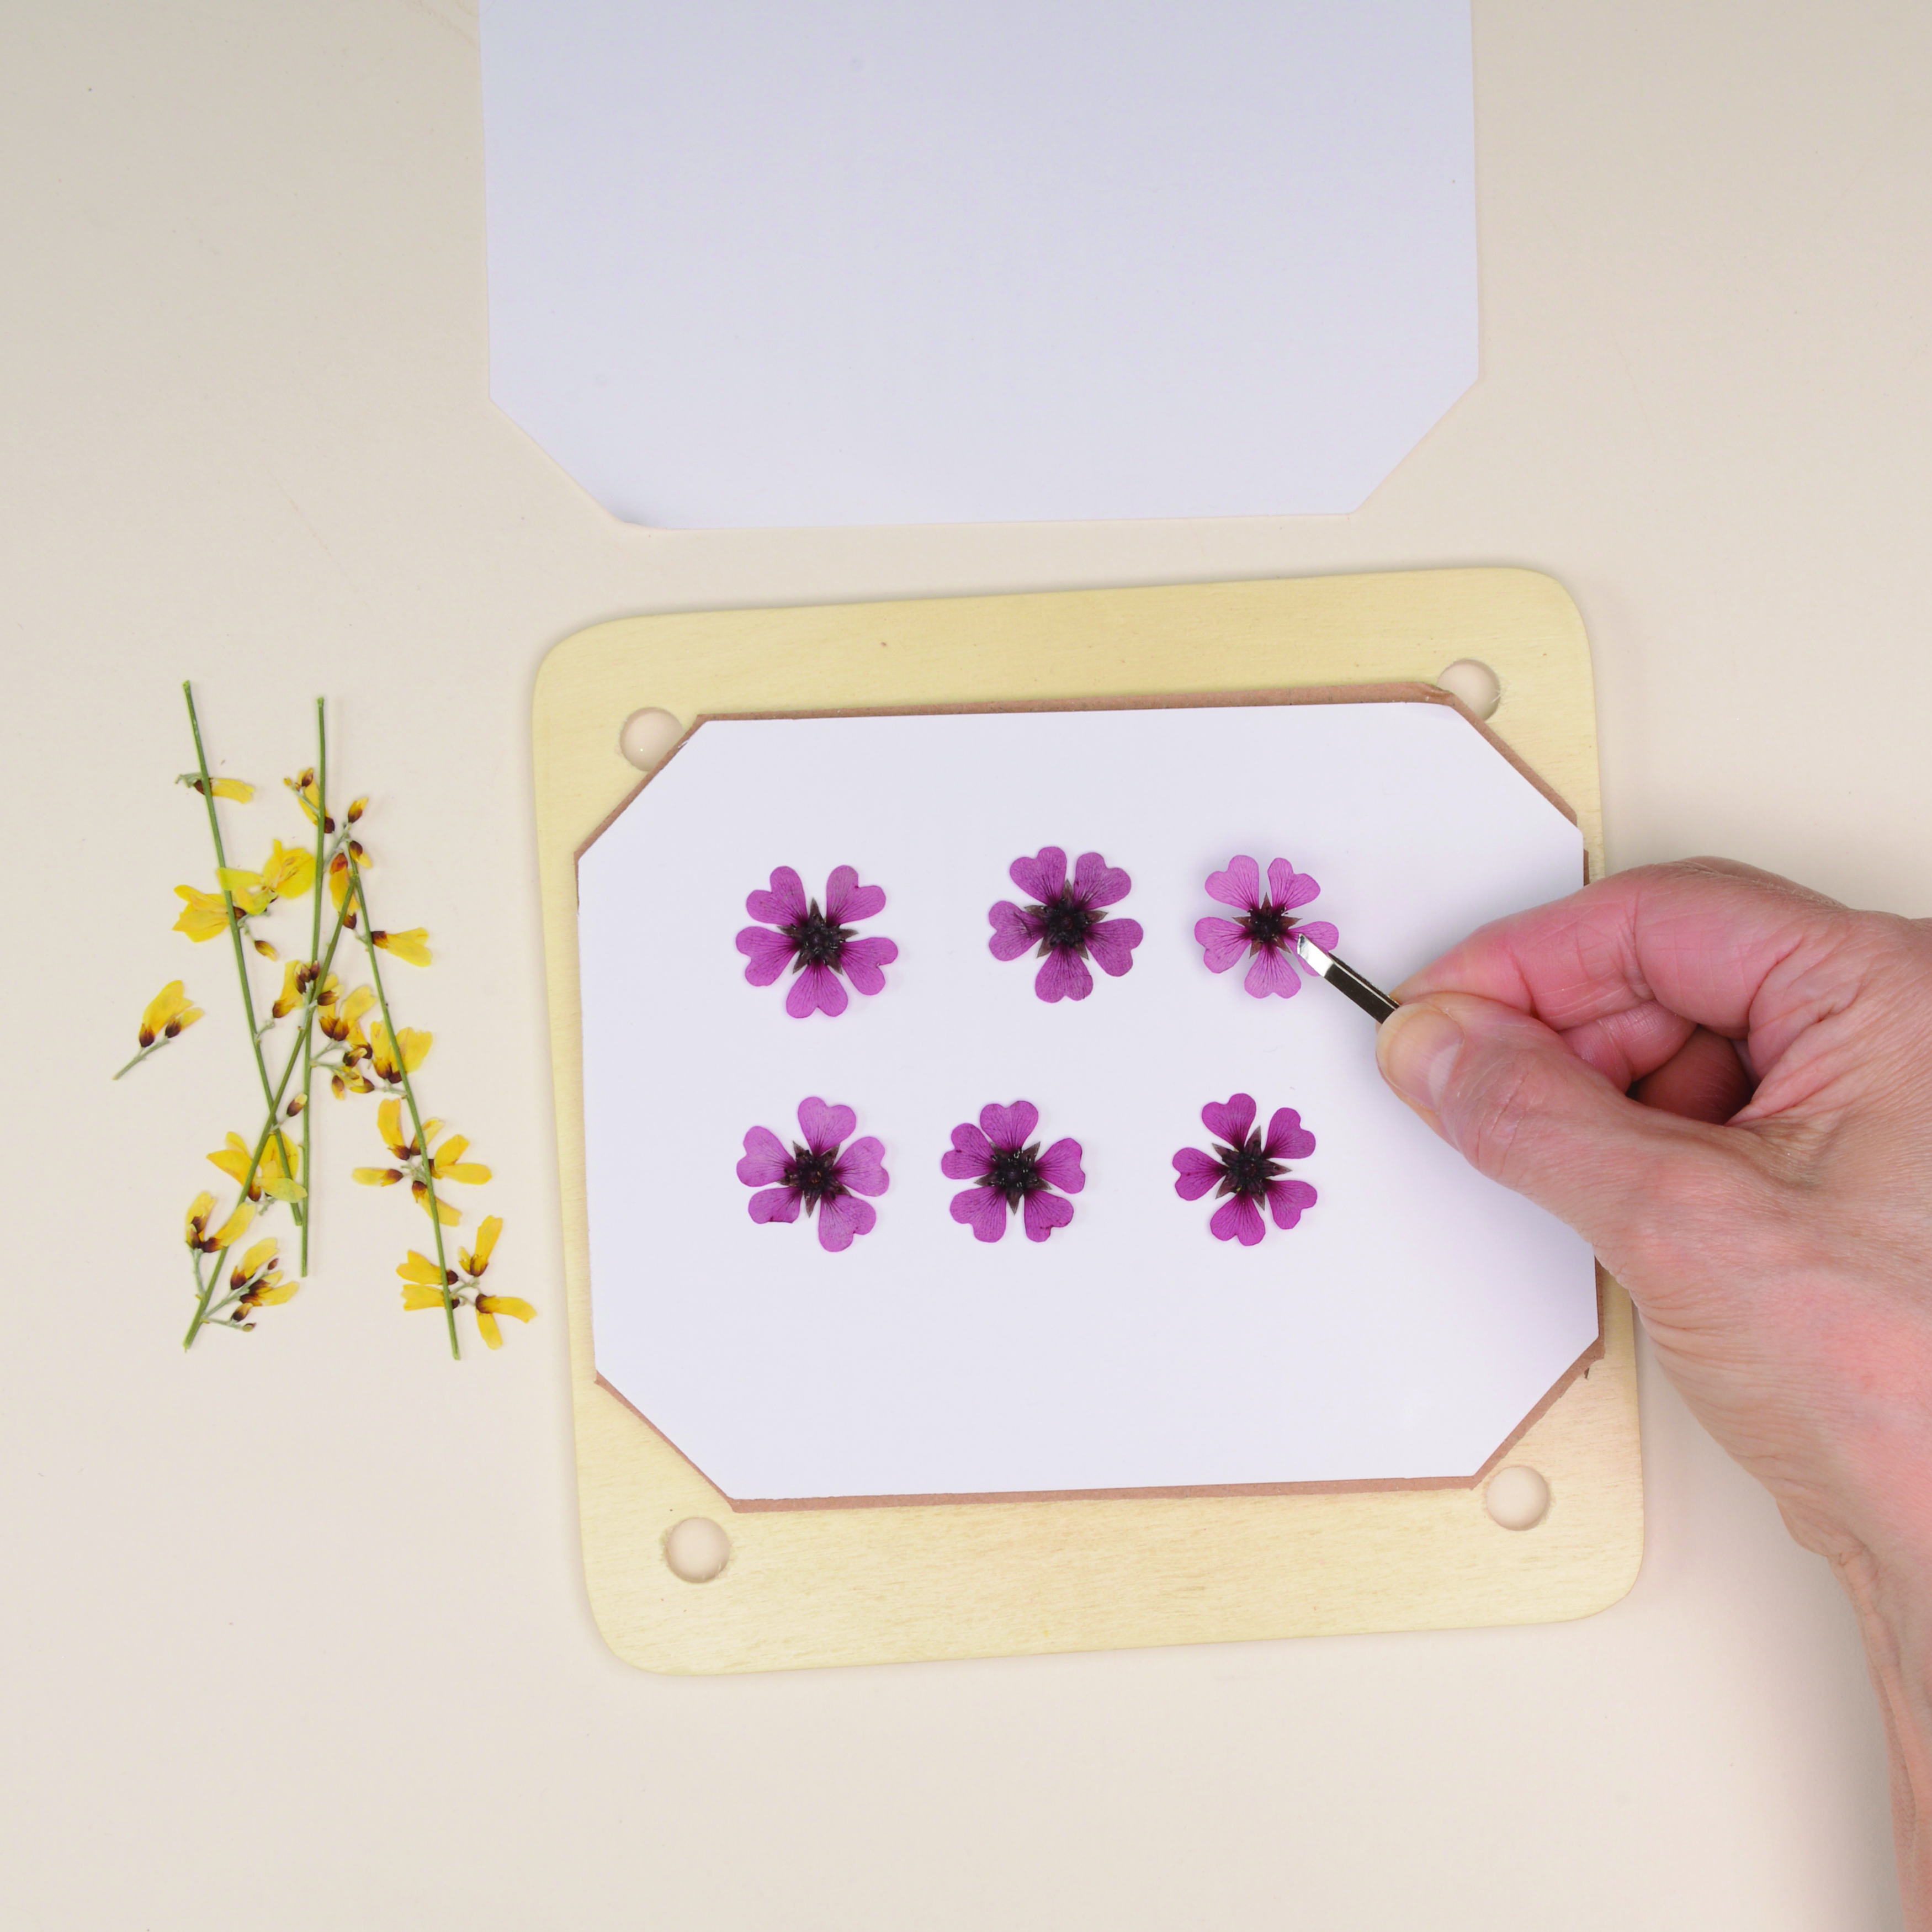 How to press flowers – step 2